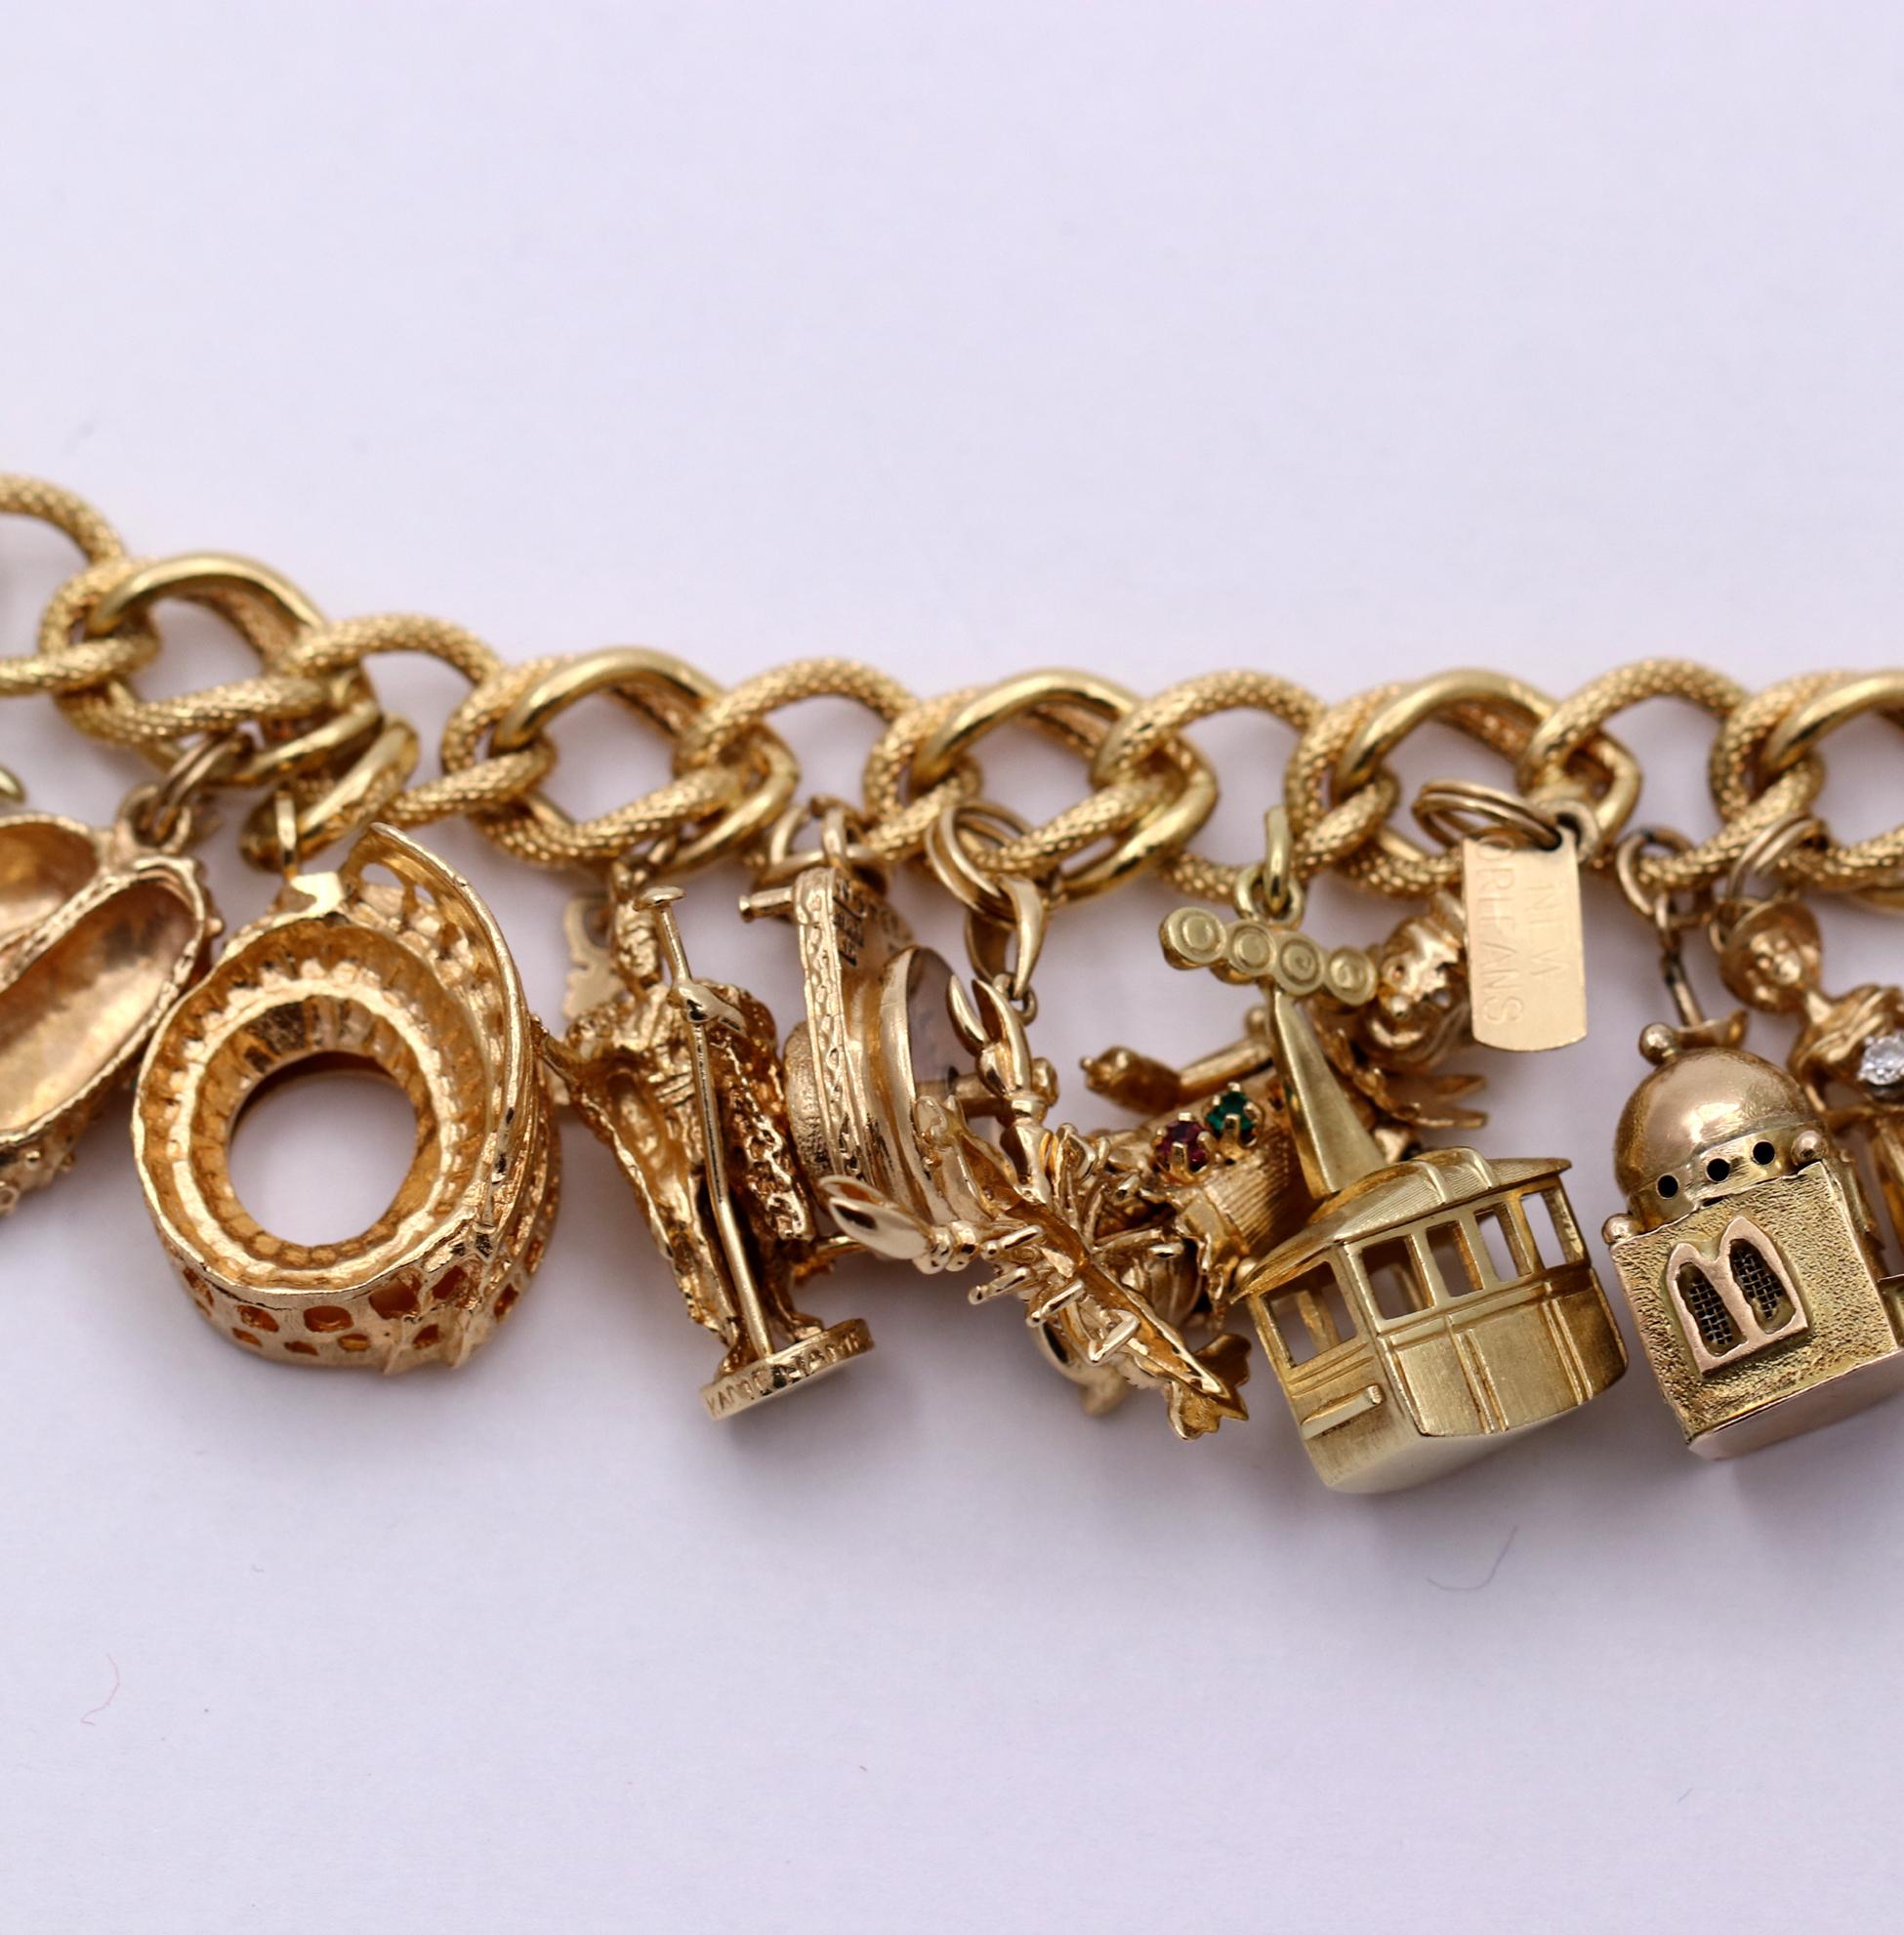 Midcentury Gold Charm Bracelet with 20 Travel Themed Charms 2